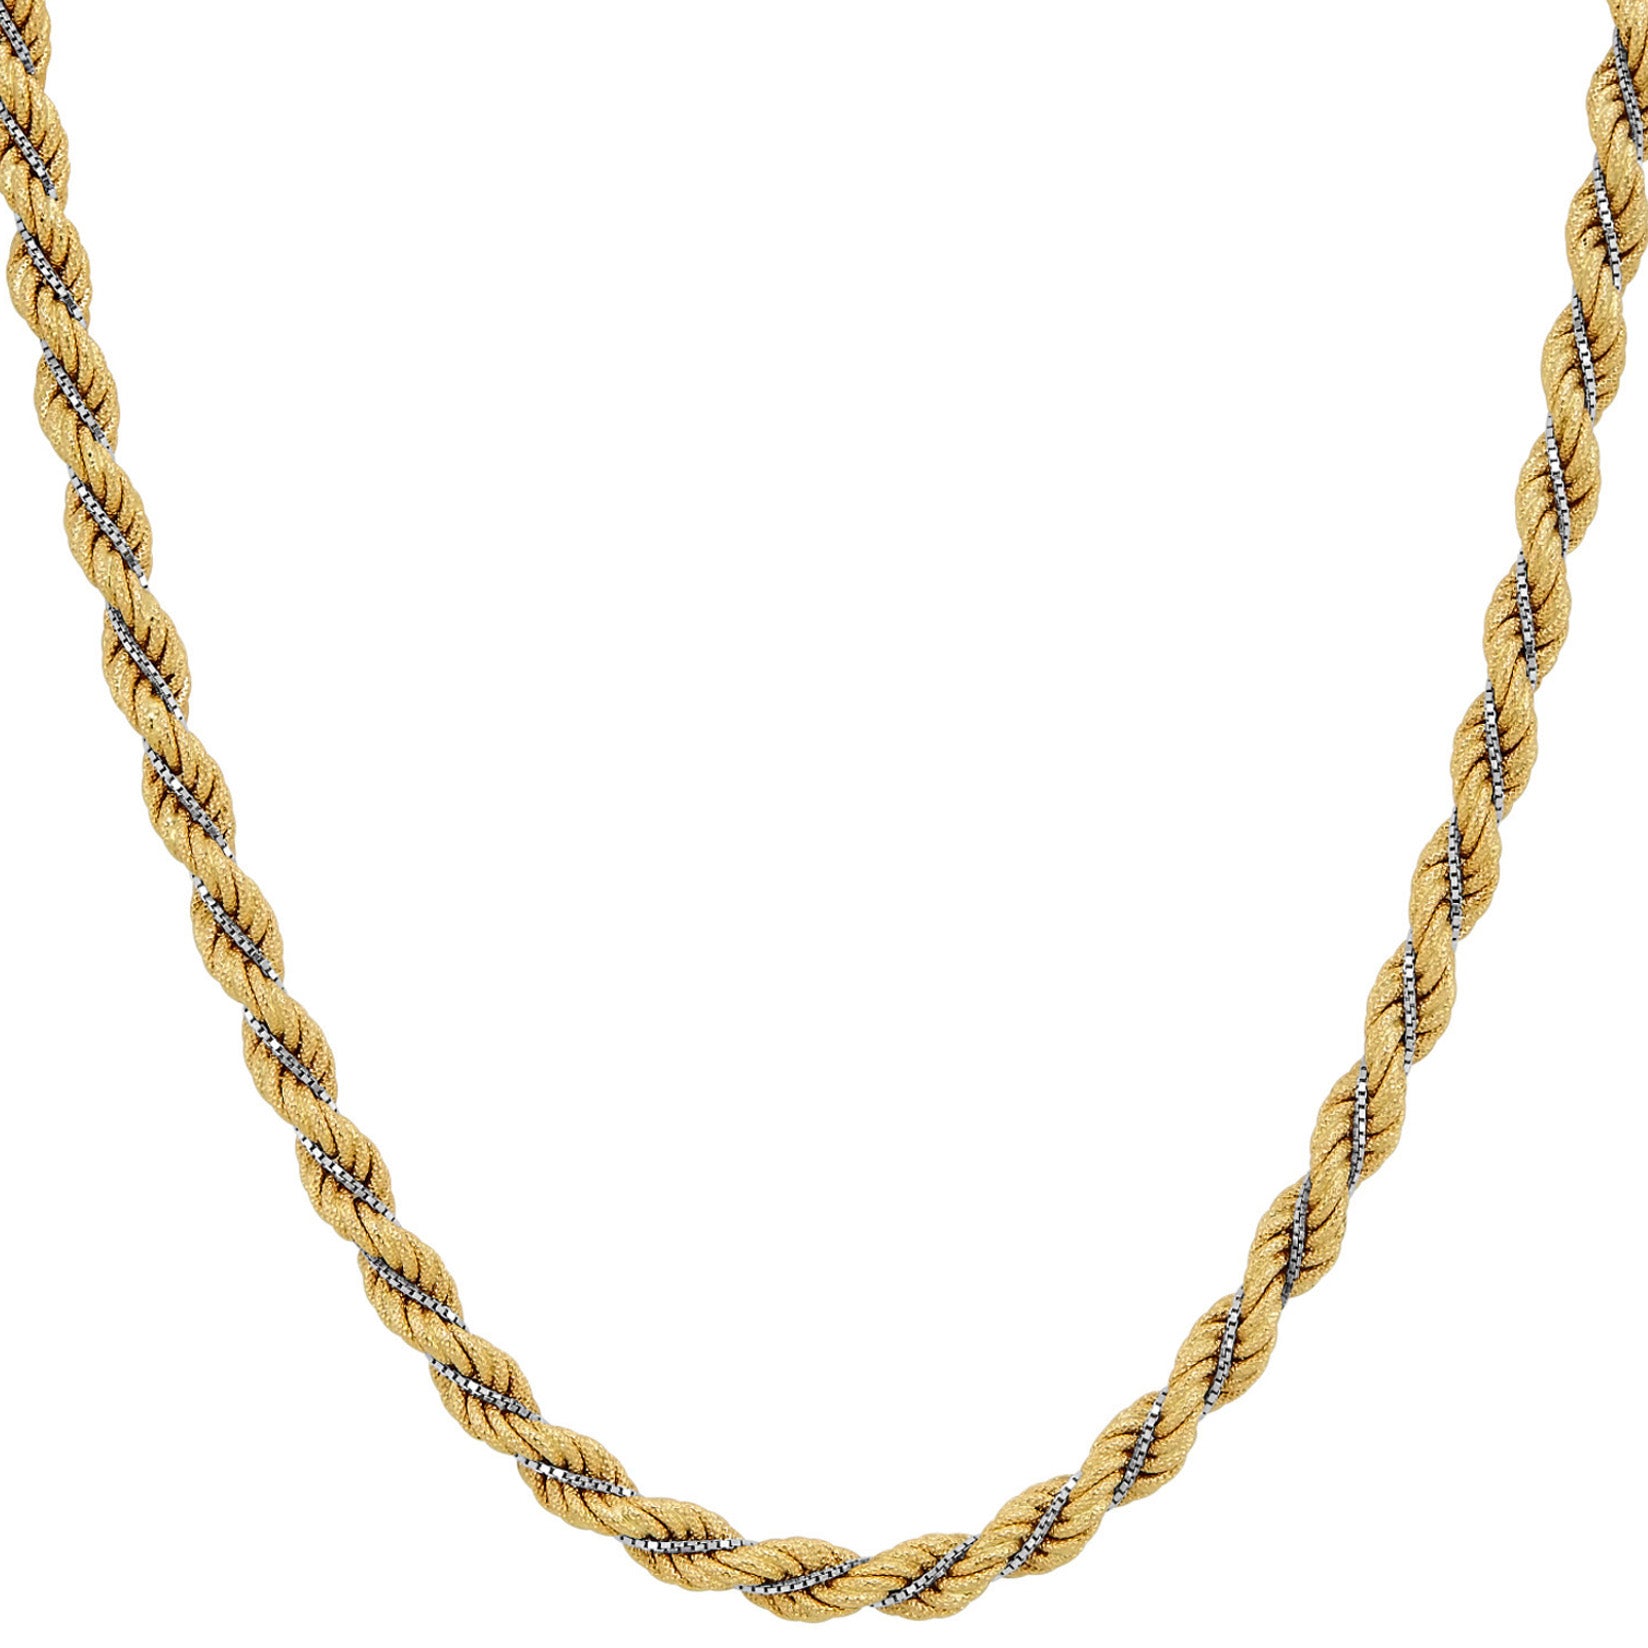 18k Gold Twisted Rope Necklace